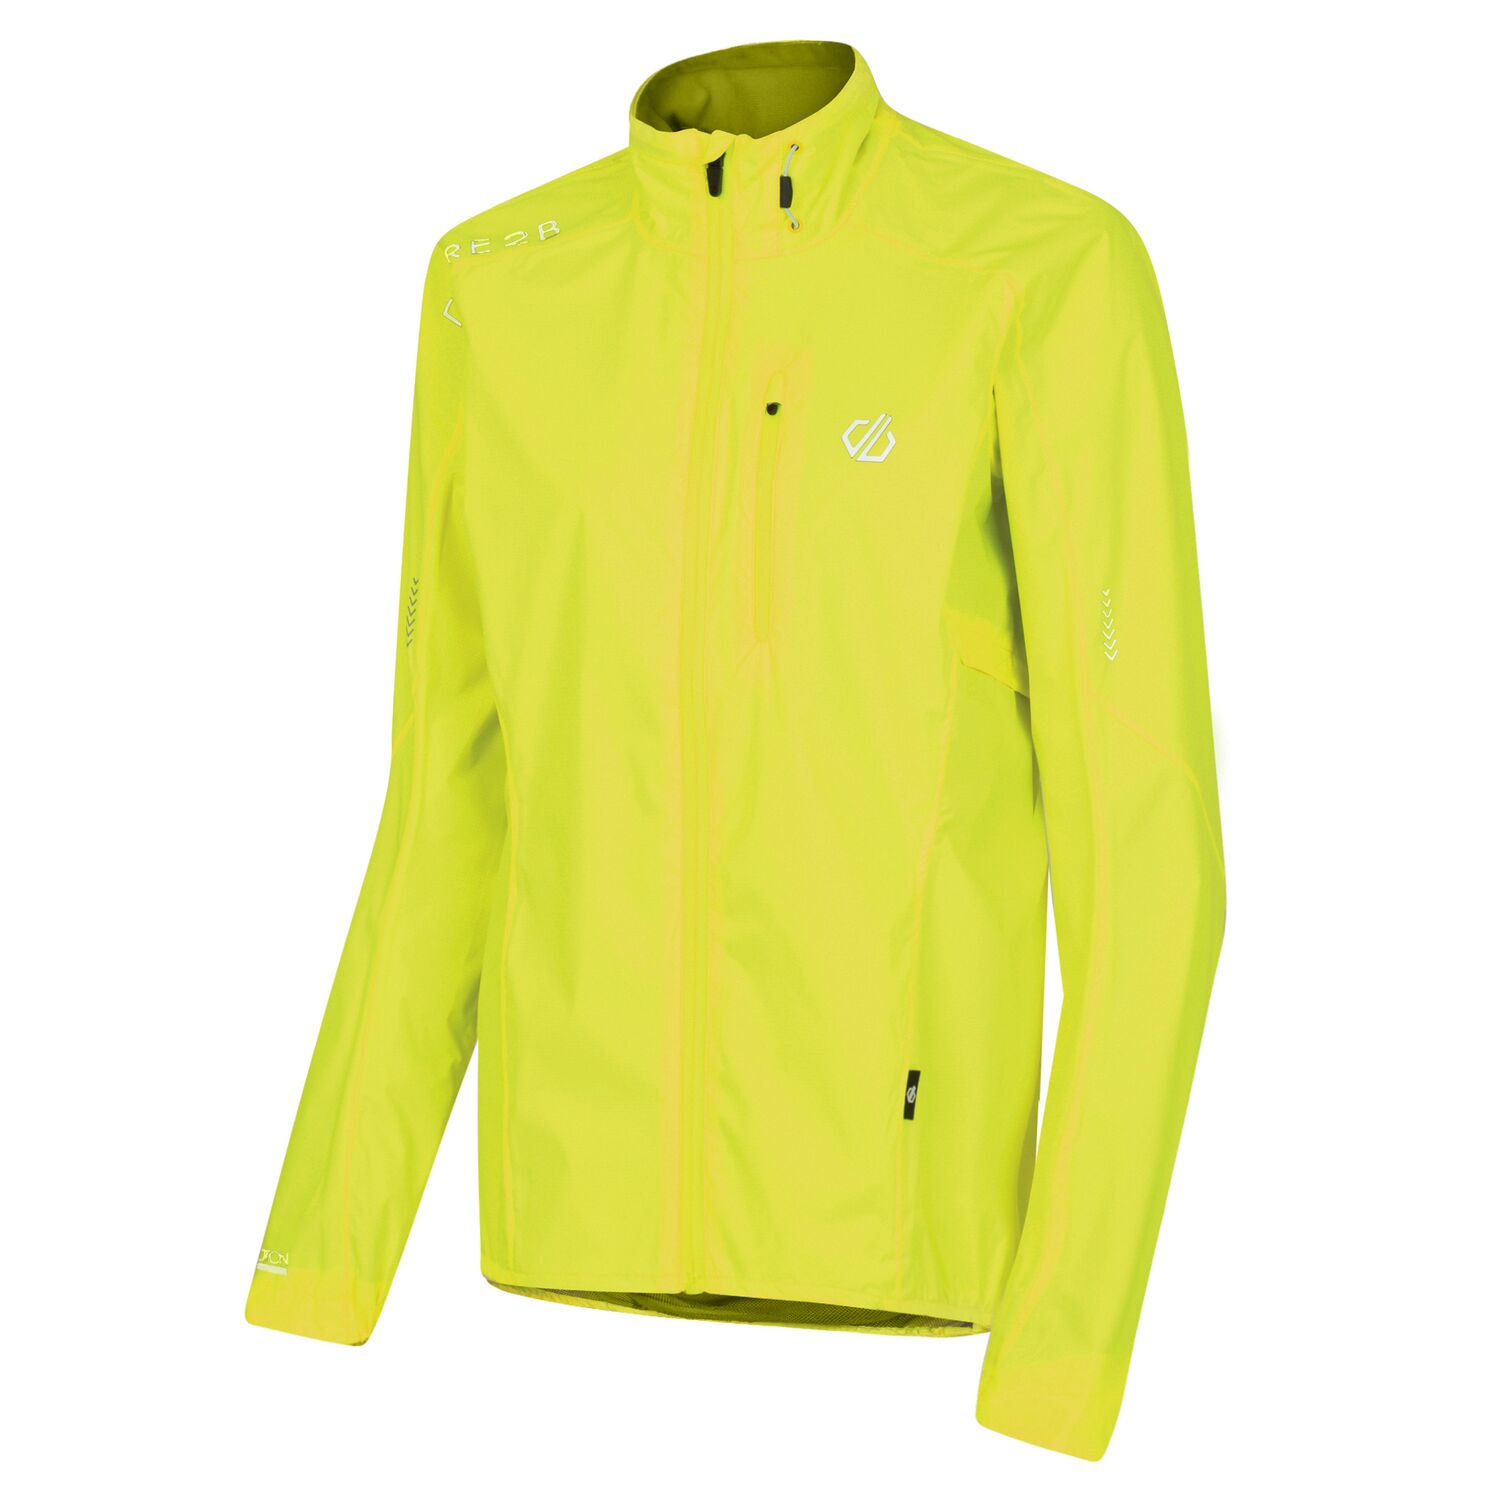 Dare2b Blighted Women's Lightweight Windproof Windshell Cycle Jacket RRP £40 